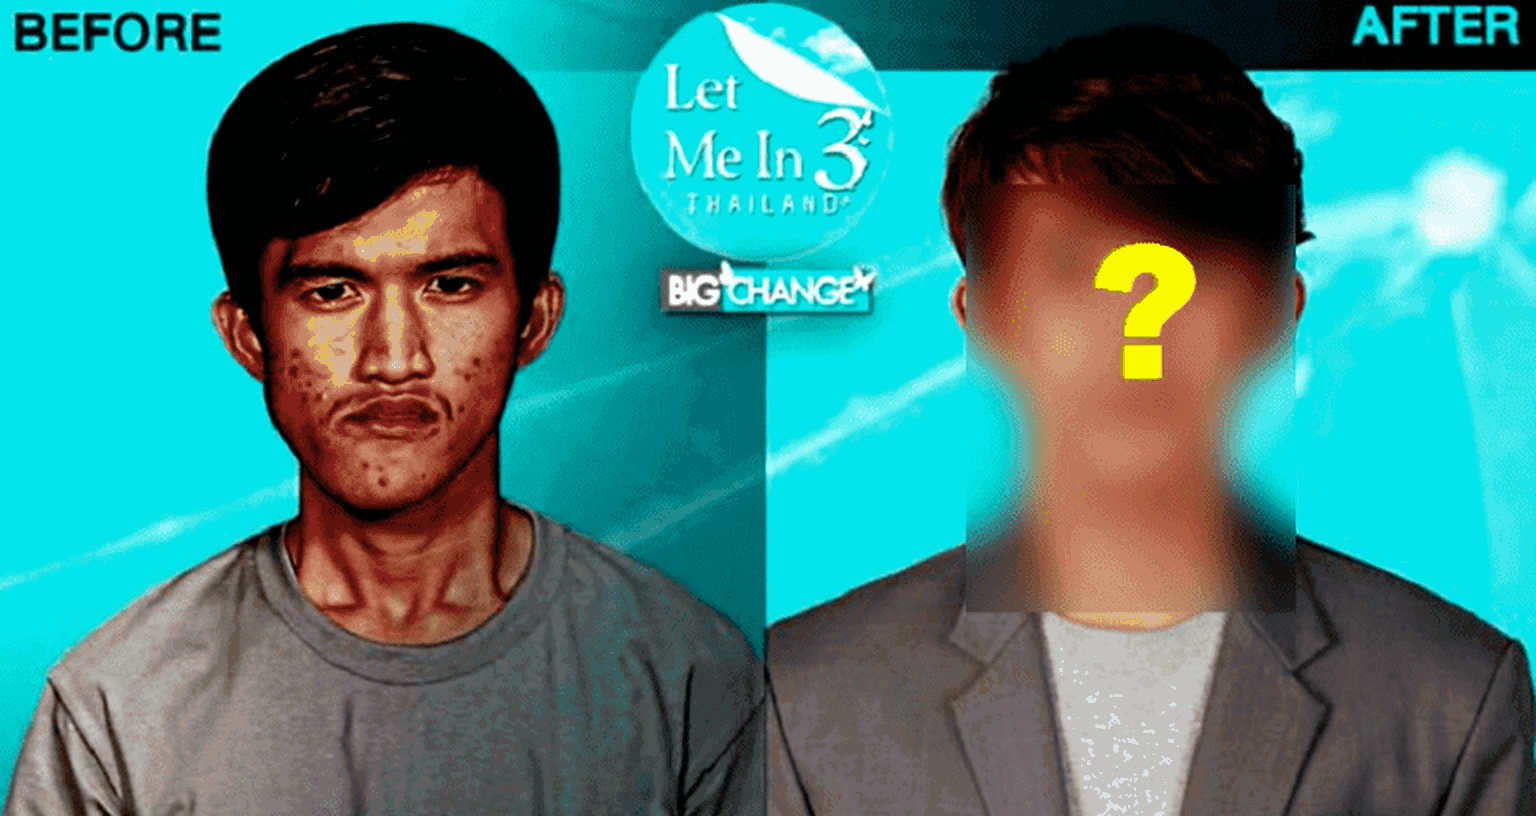 Thai Makeover Show Gives Man With Disfigured Jaw the Most Epic Transformation